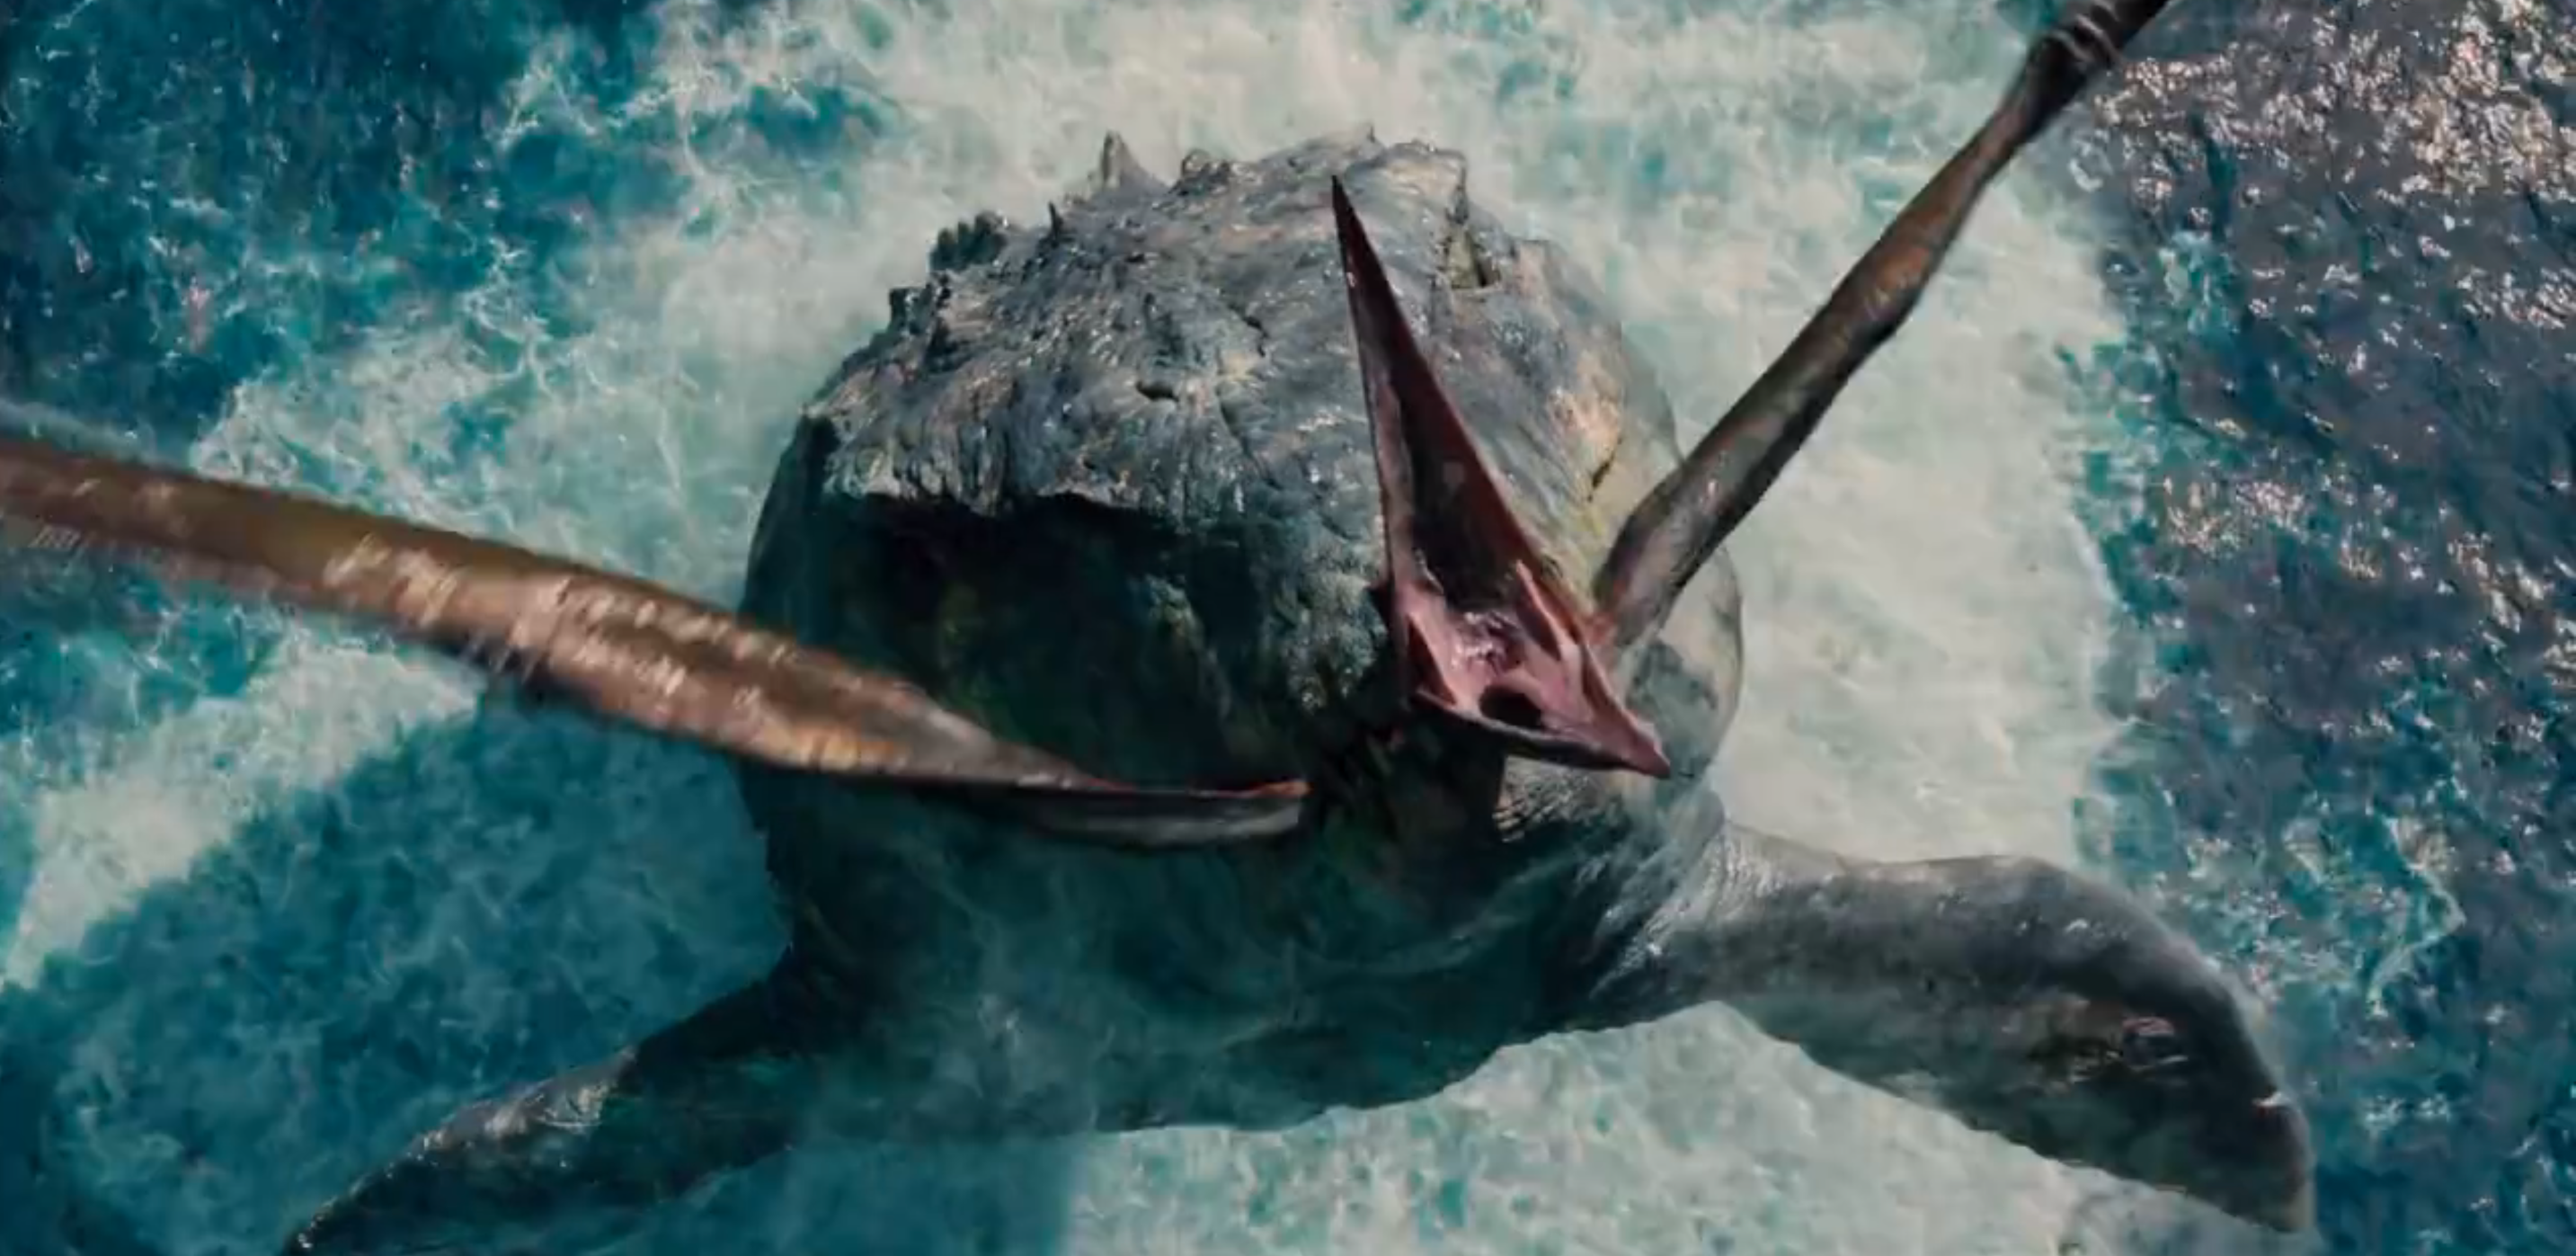 Why One of the Deaths in Jurassic World is Massively Out of Proportion